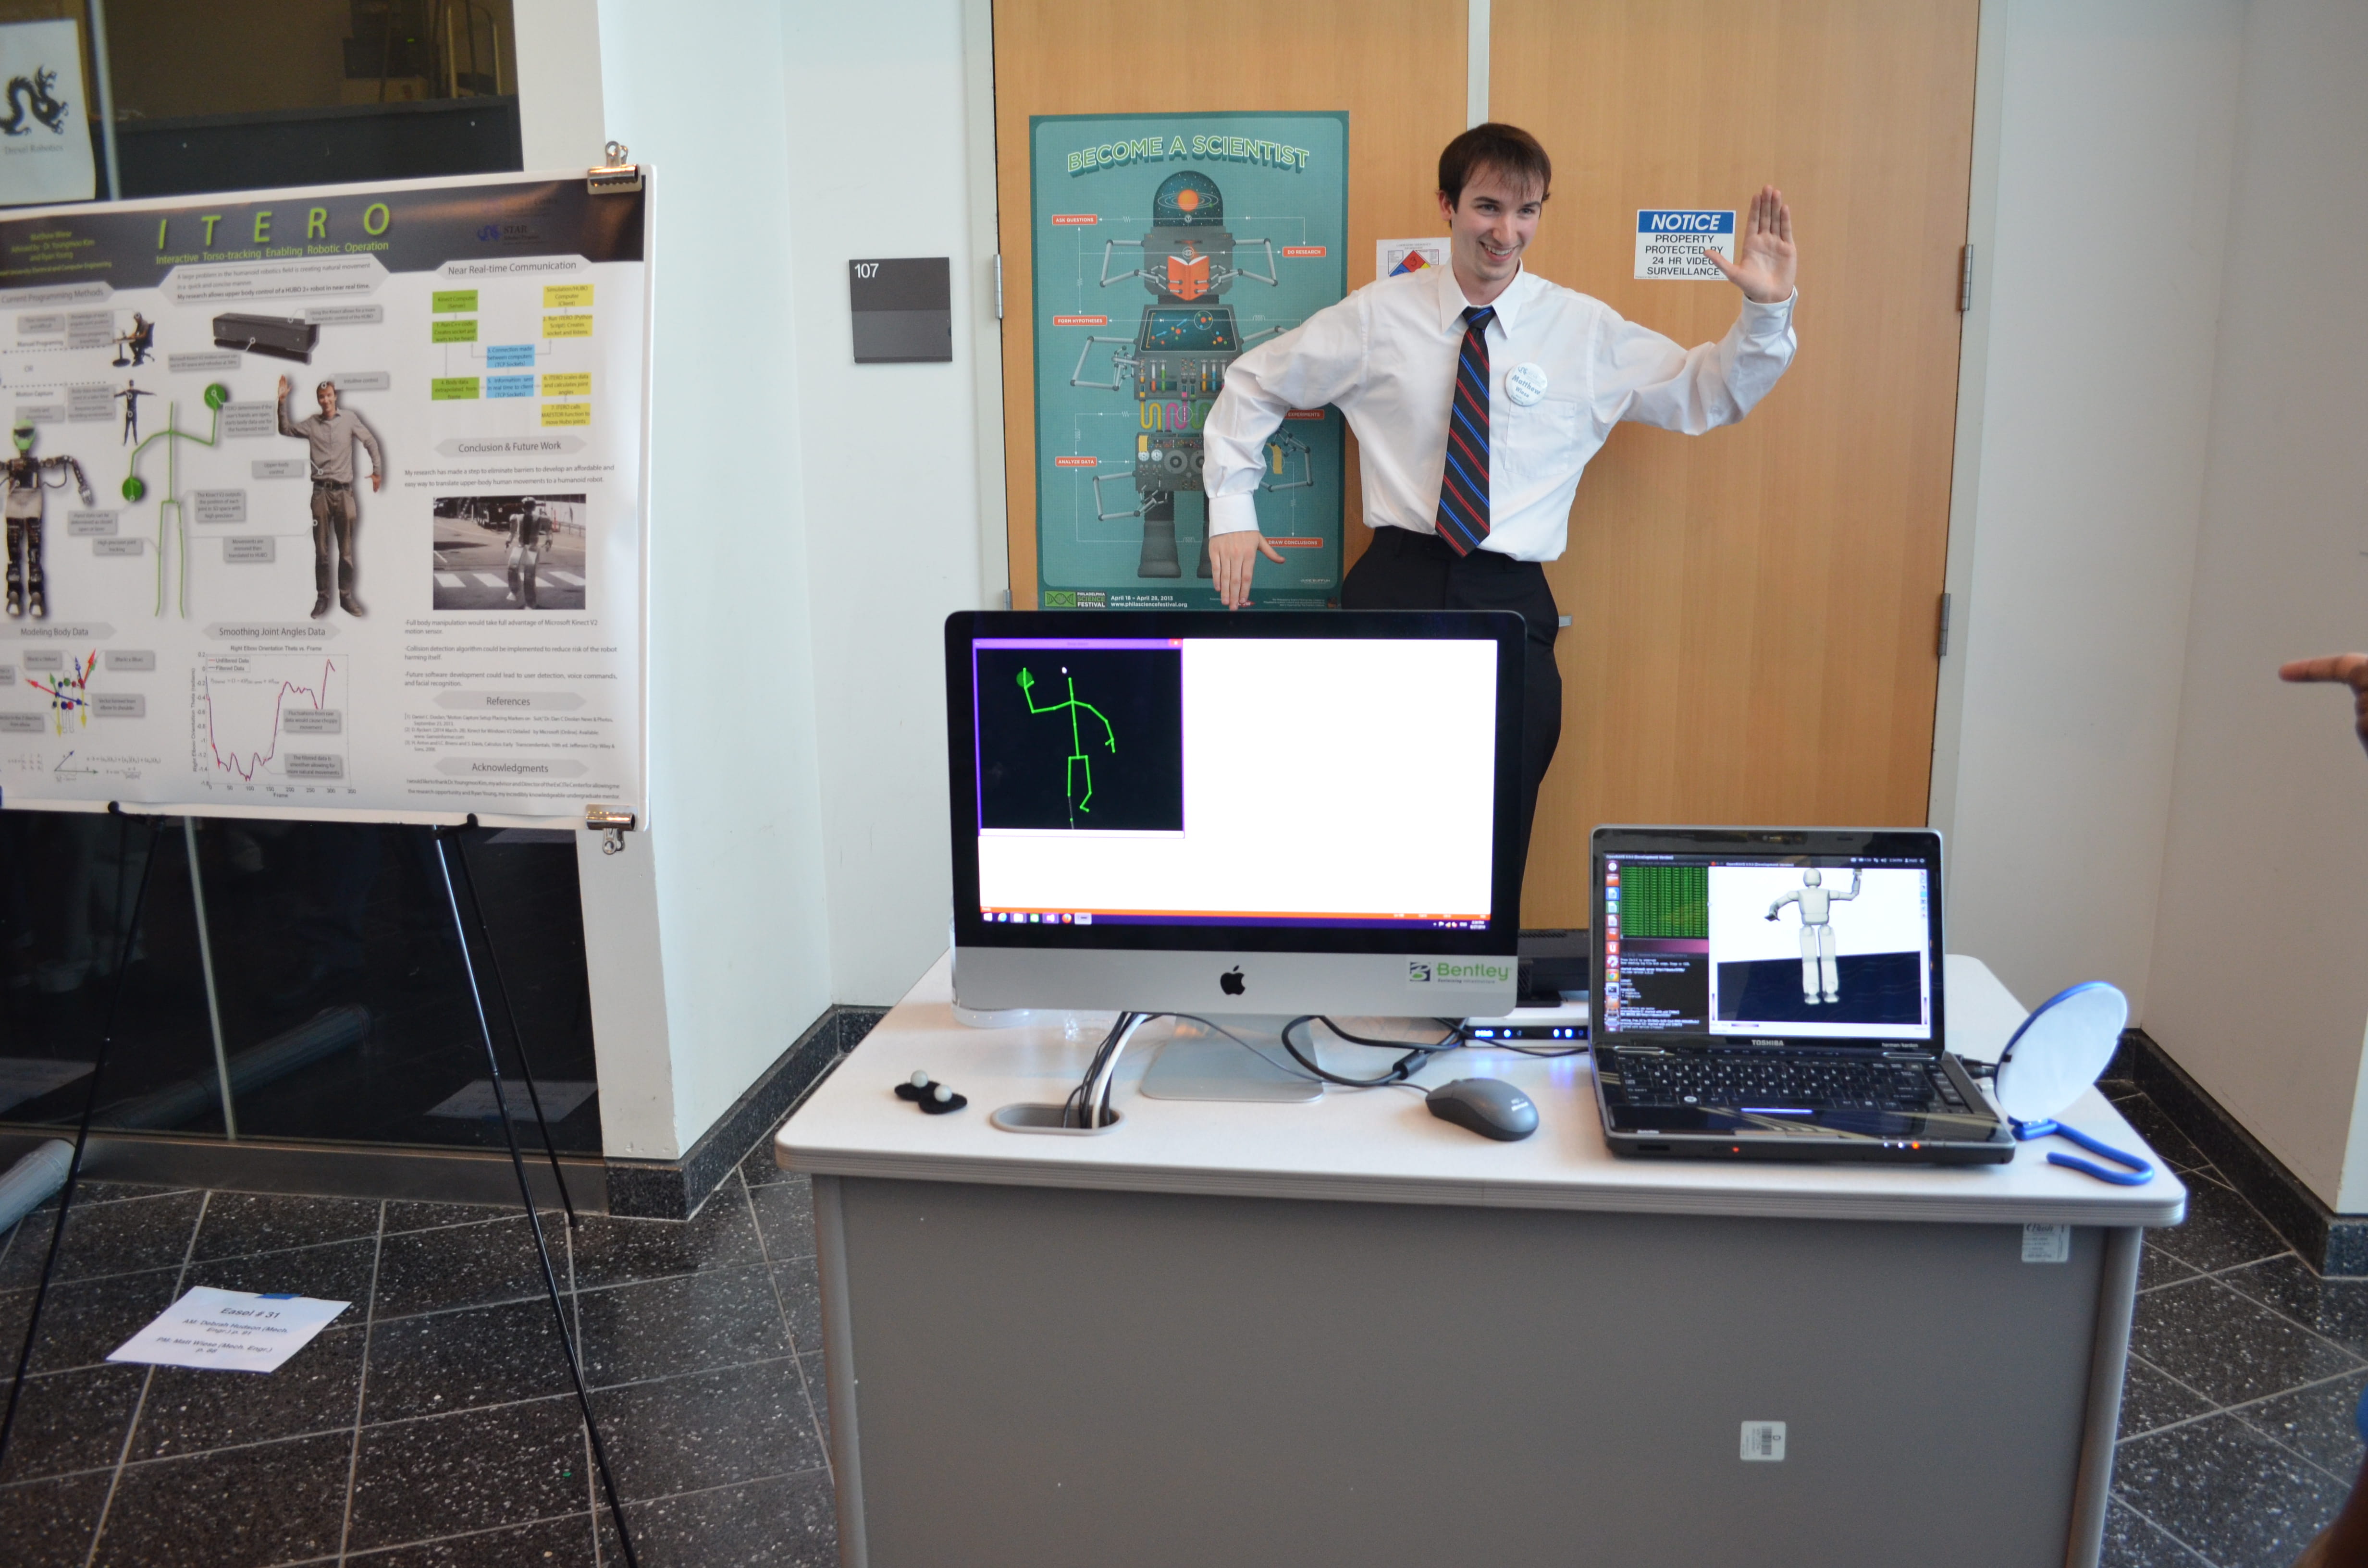 A 2014 STAR Scholar demonstrates his research.